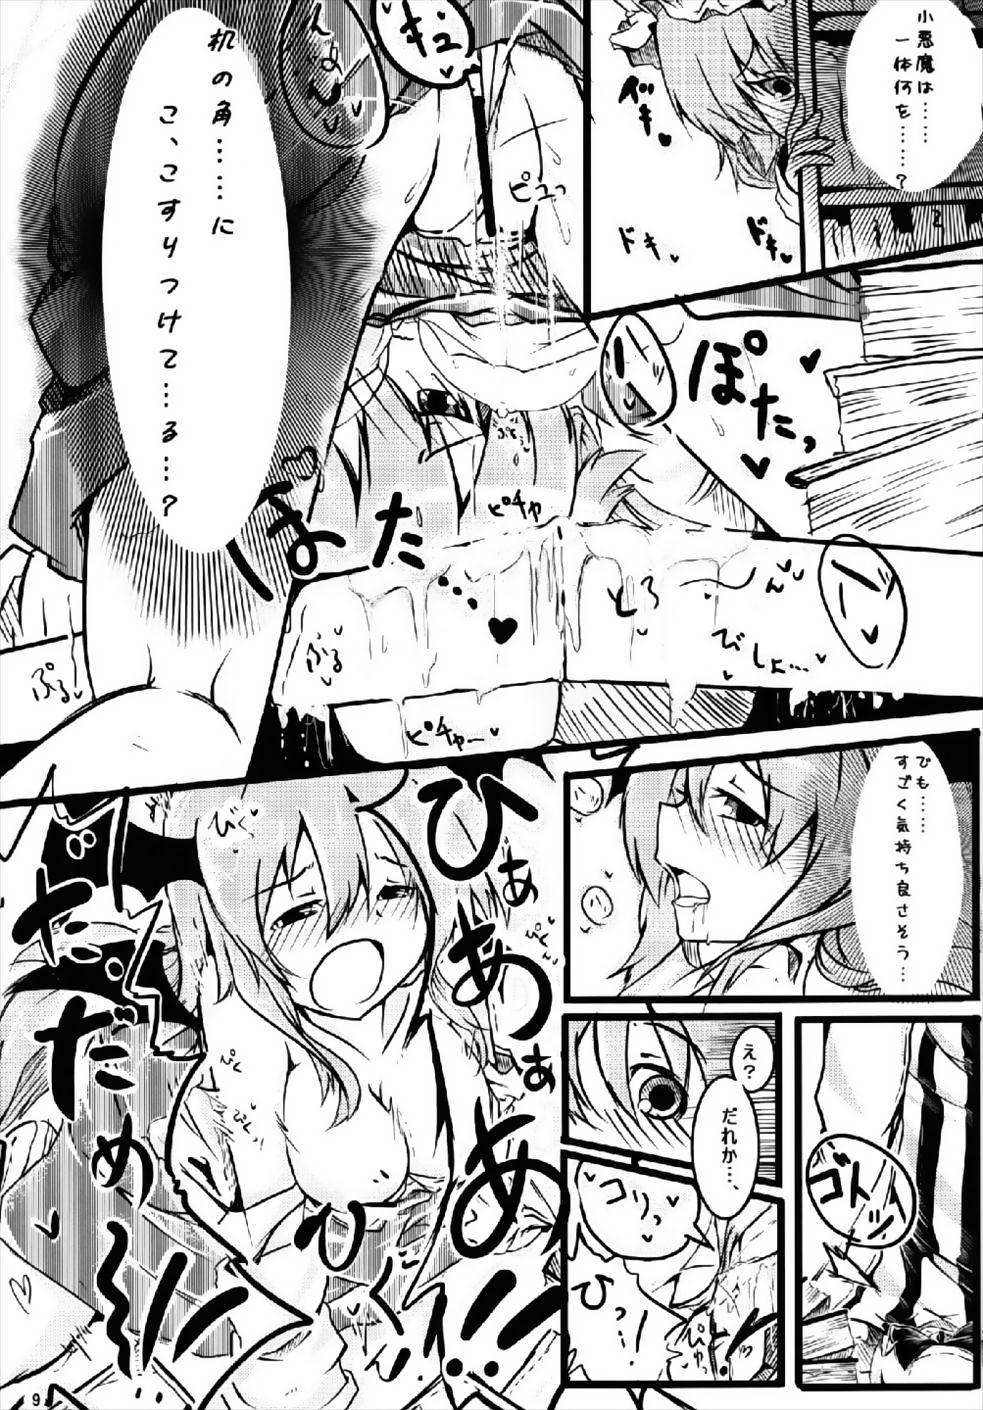 Latex RemiFlaPatche! - Touhou project Caught - Page 8